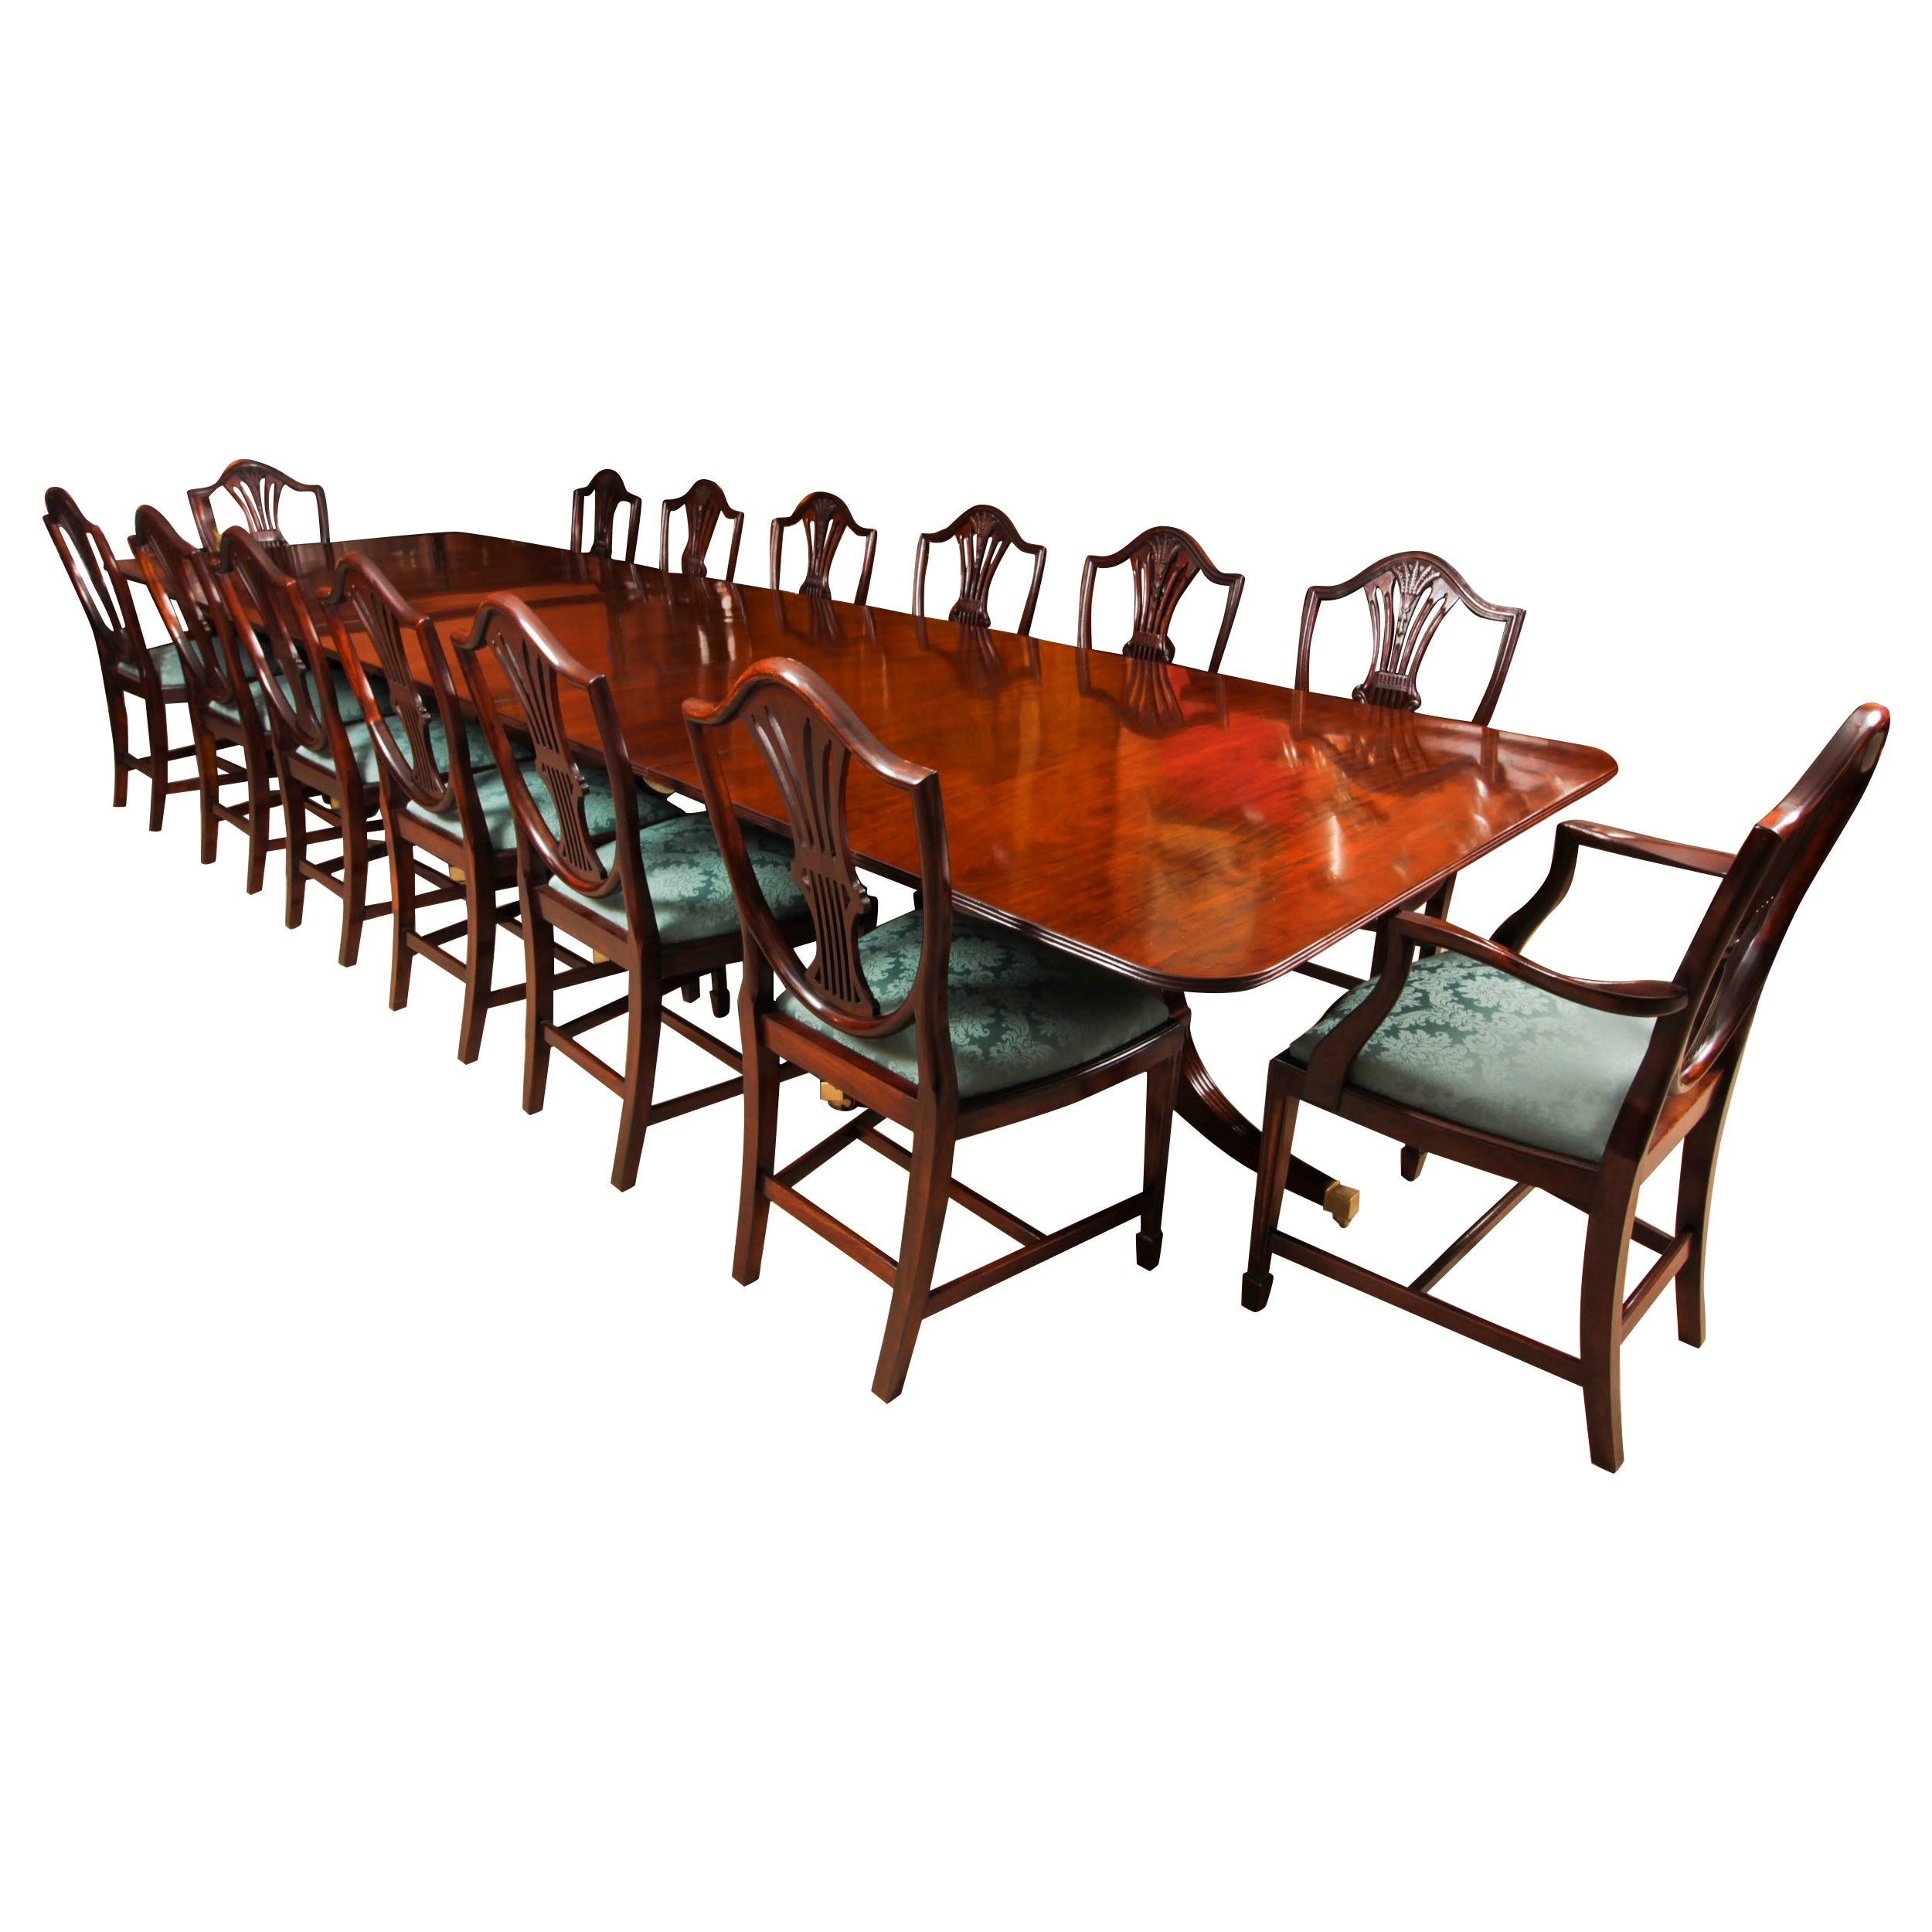 Antique 14ft Regency Revival Triple Pillar Dining Table & 14 Chairs 19th Century For Sale